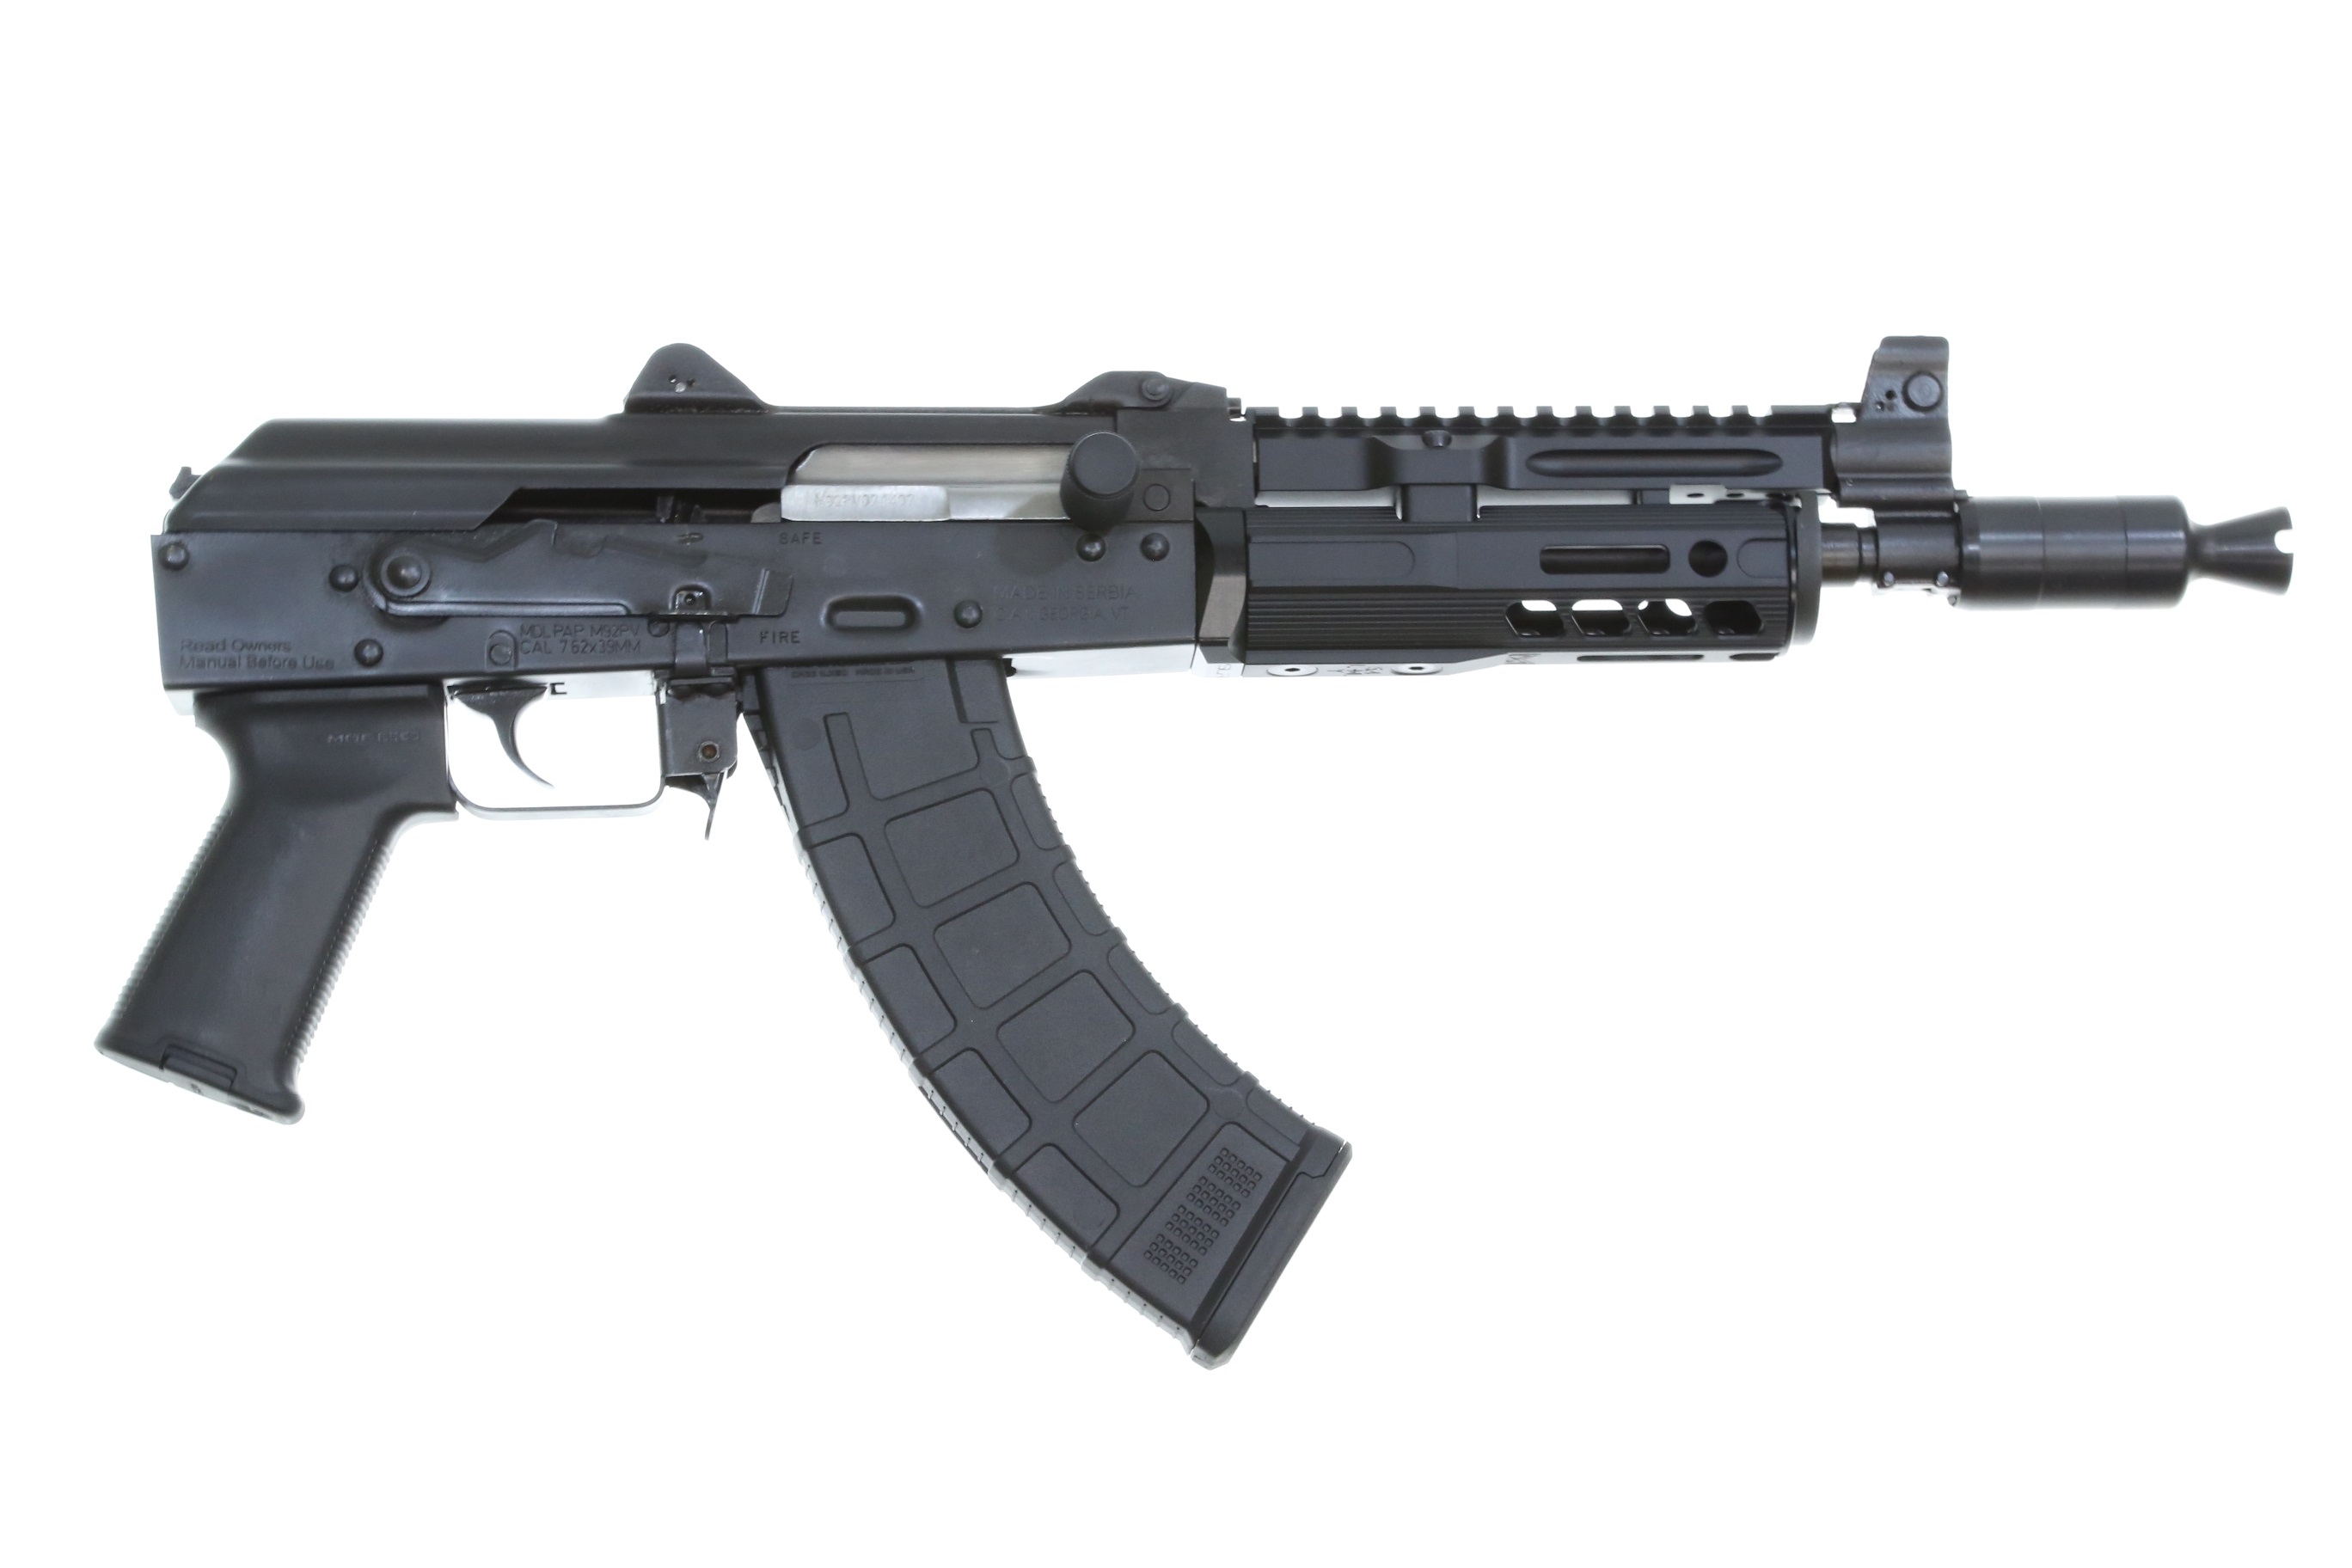 Century’s PAP M92 PV AK-style pistol has a 10" cold hammer-forged barr...